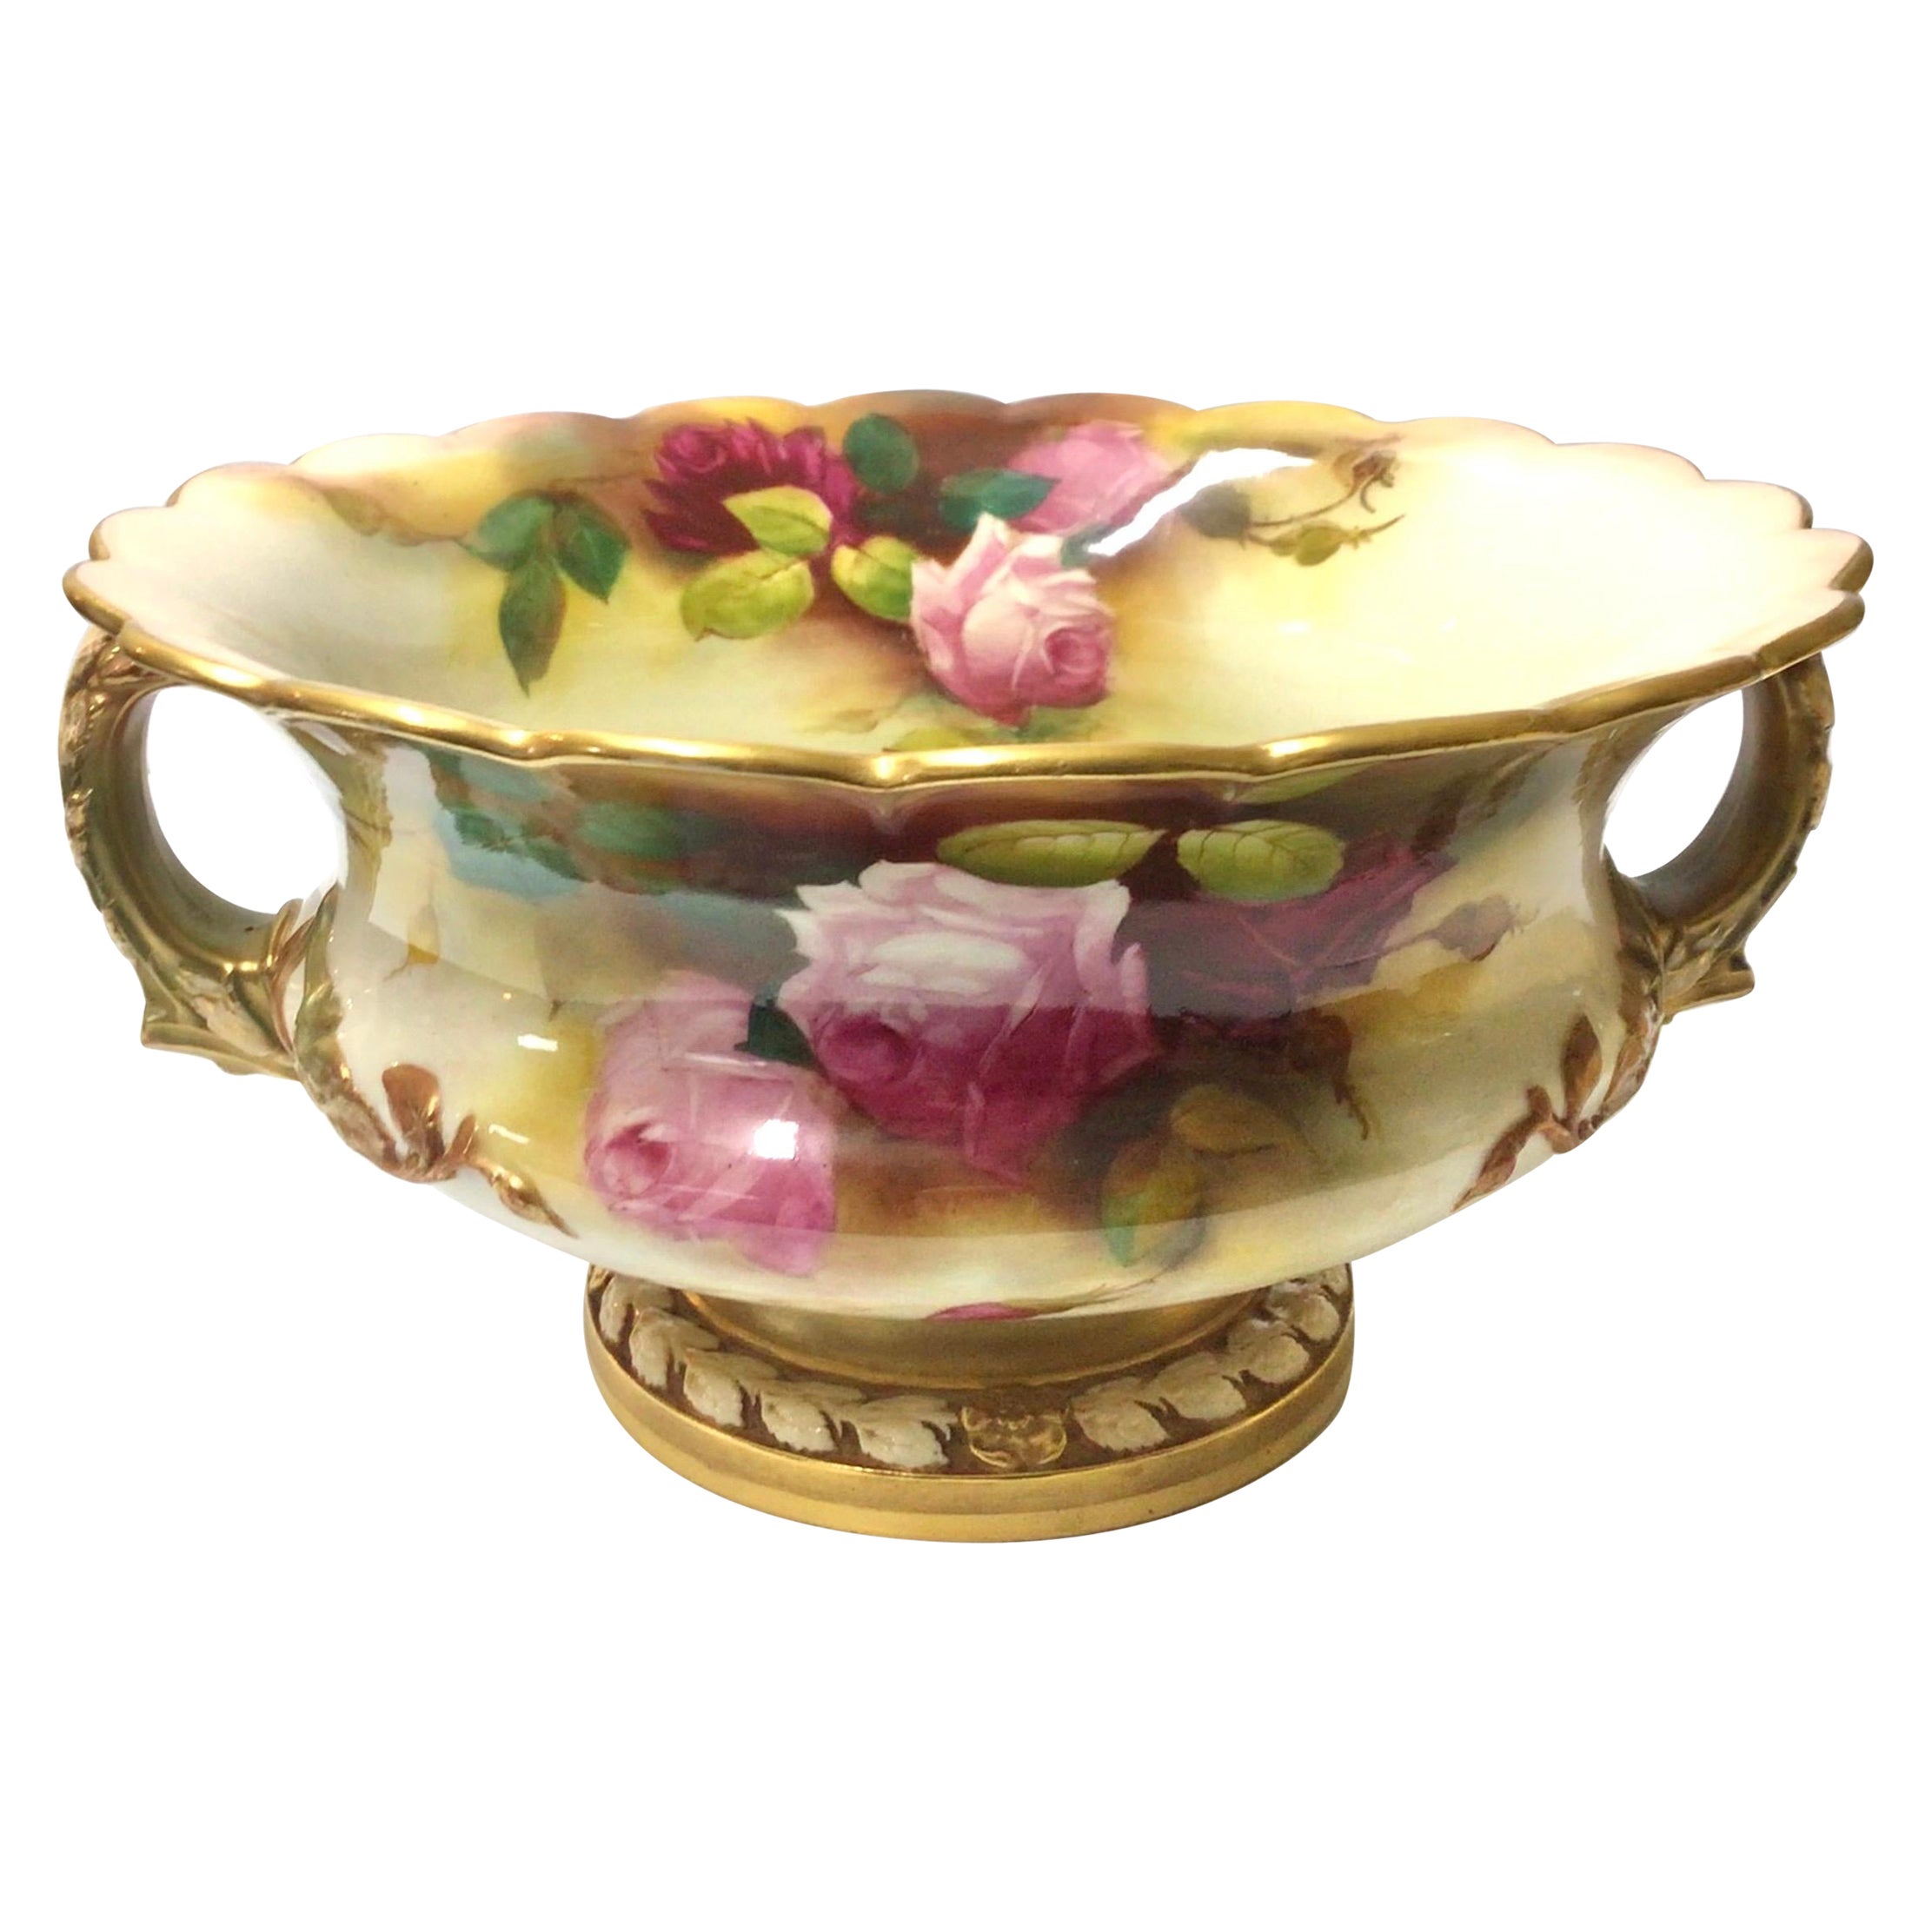 Large Antique Royal Worcester Jardiniere Bowl Vase Hand Painted With Roses